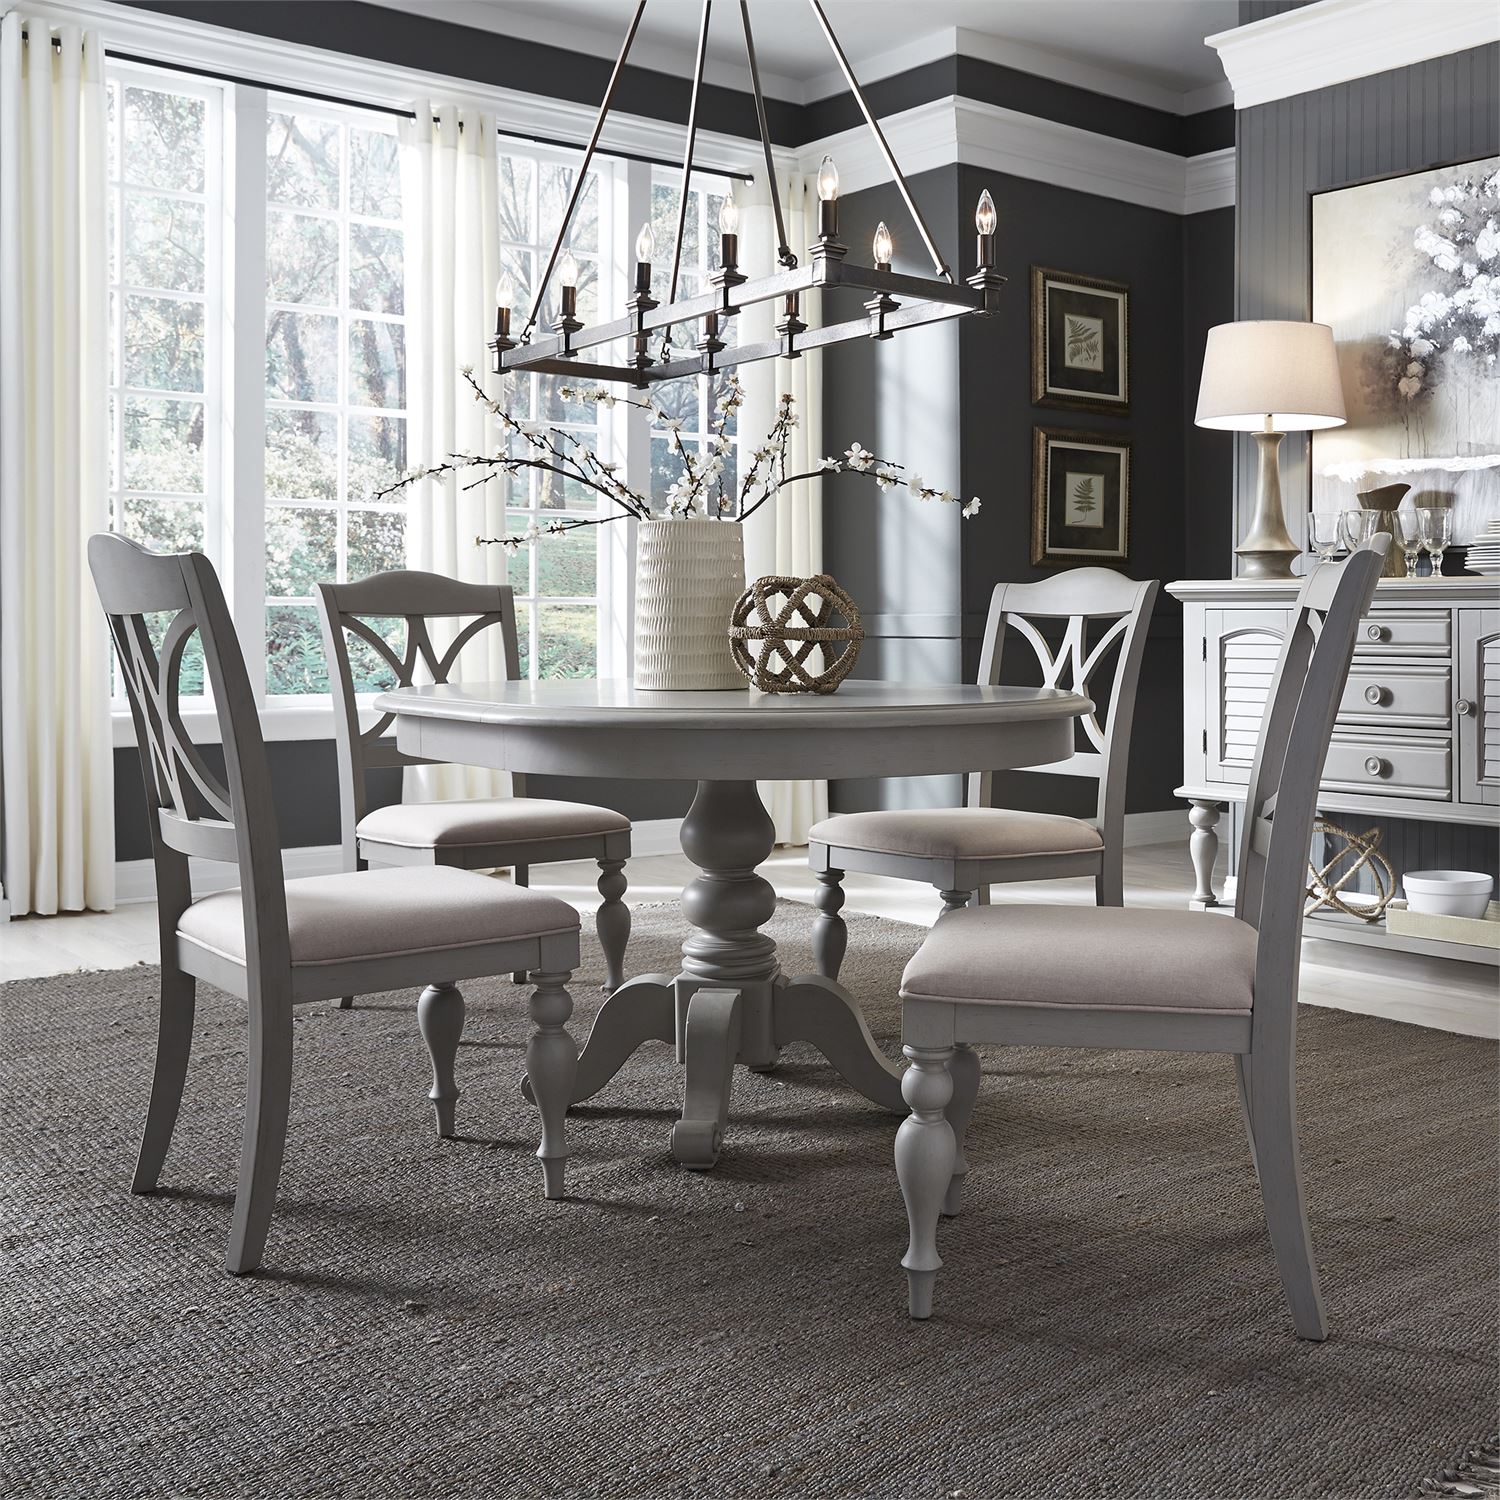 5 piece dining room set in Dove Grey Finish